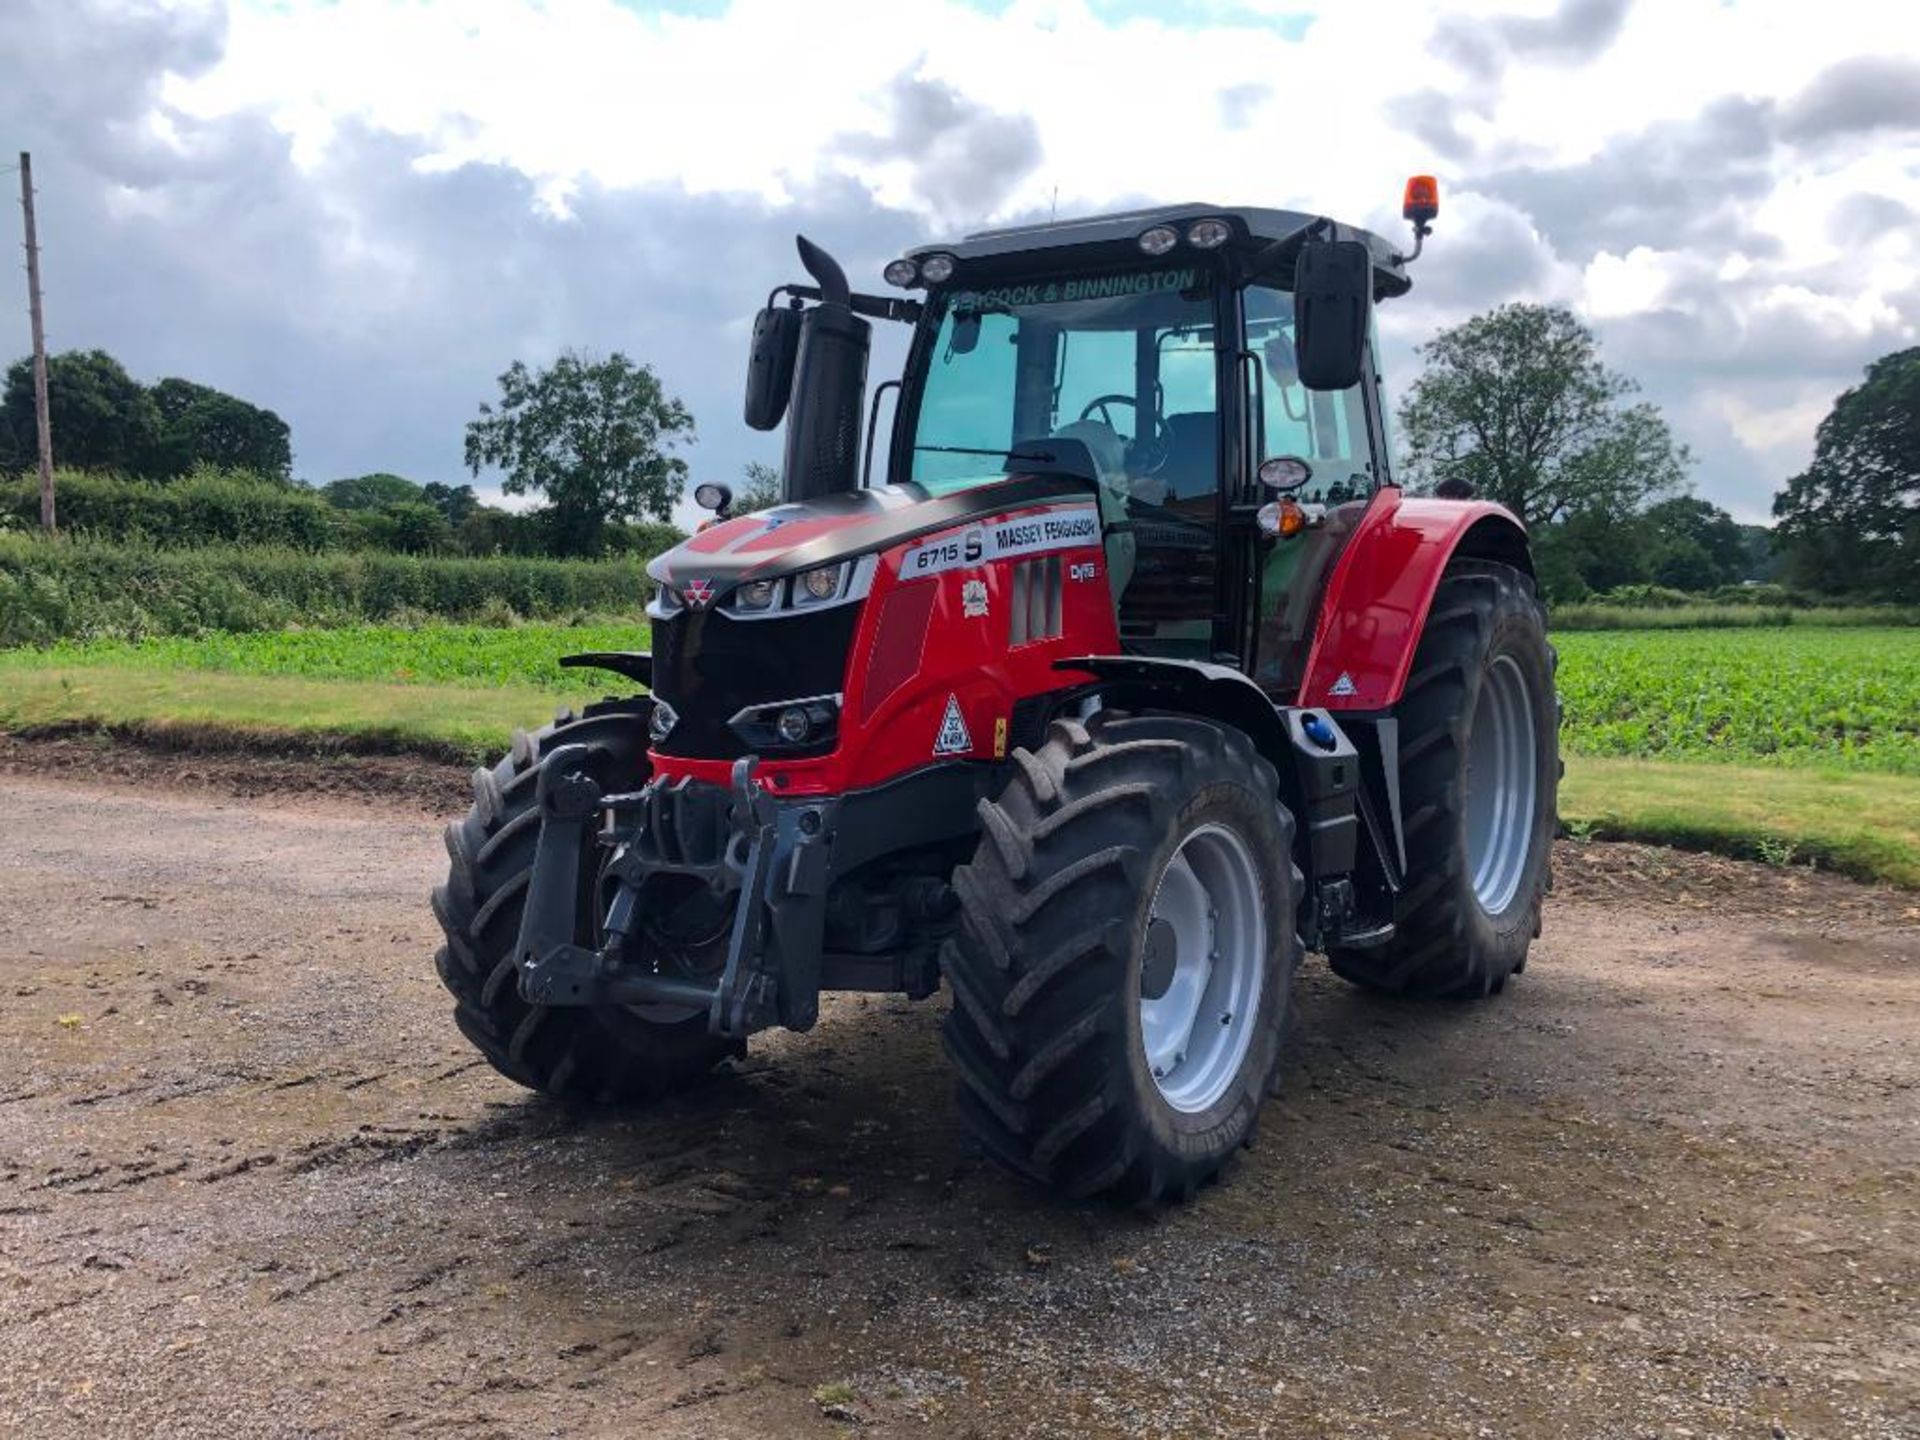 2019 Massey Ferguson 6715 S Dyna 6 50kph 4wd tractor c/w 3 manual spools, front linkage, air brakes, - Image 41 of 41